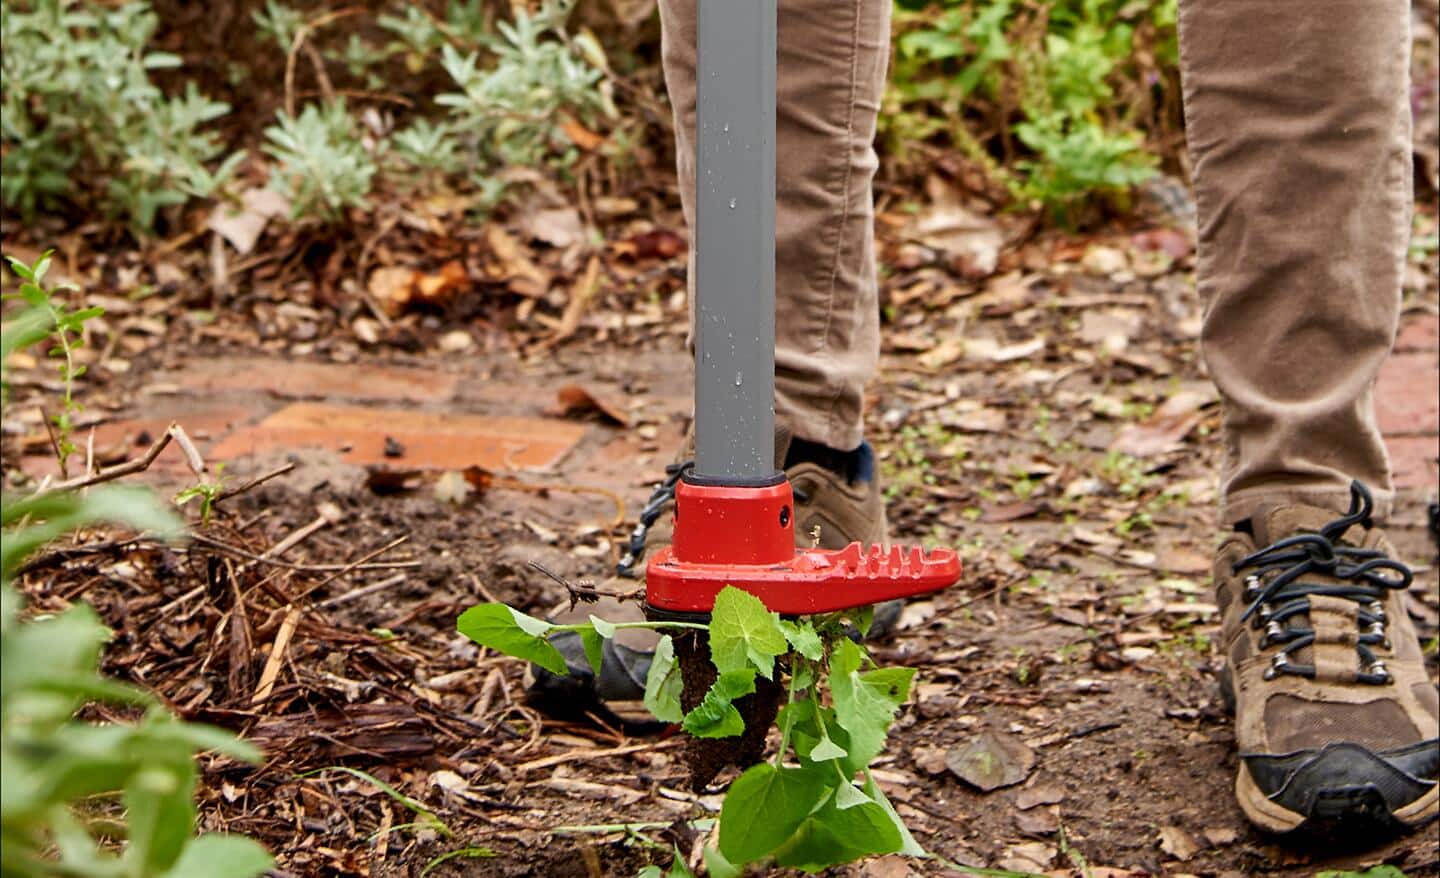 Person uses a stand-up weeding tool to pull weeds